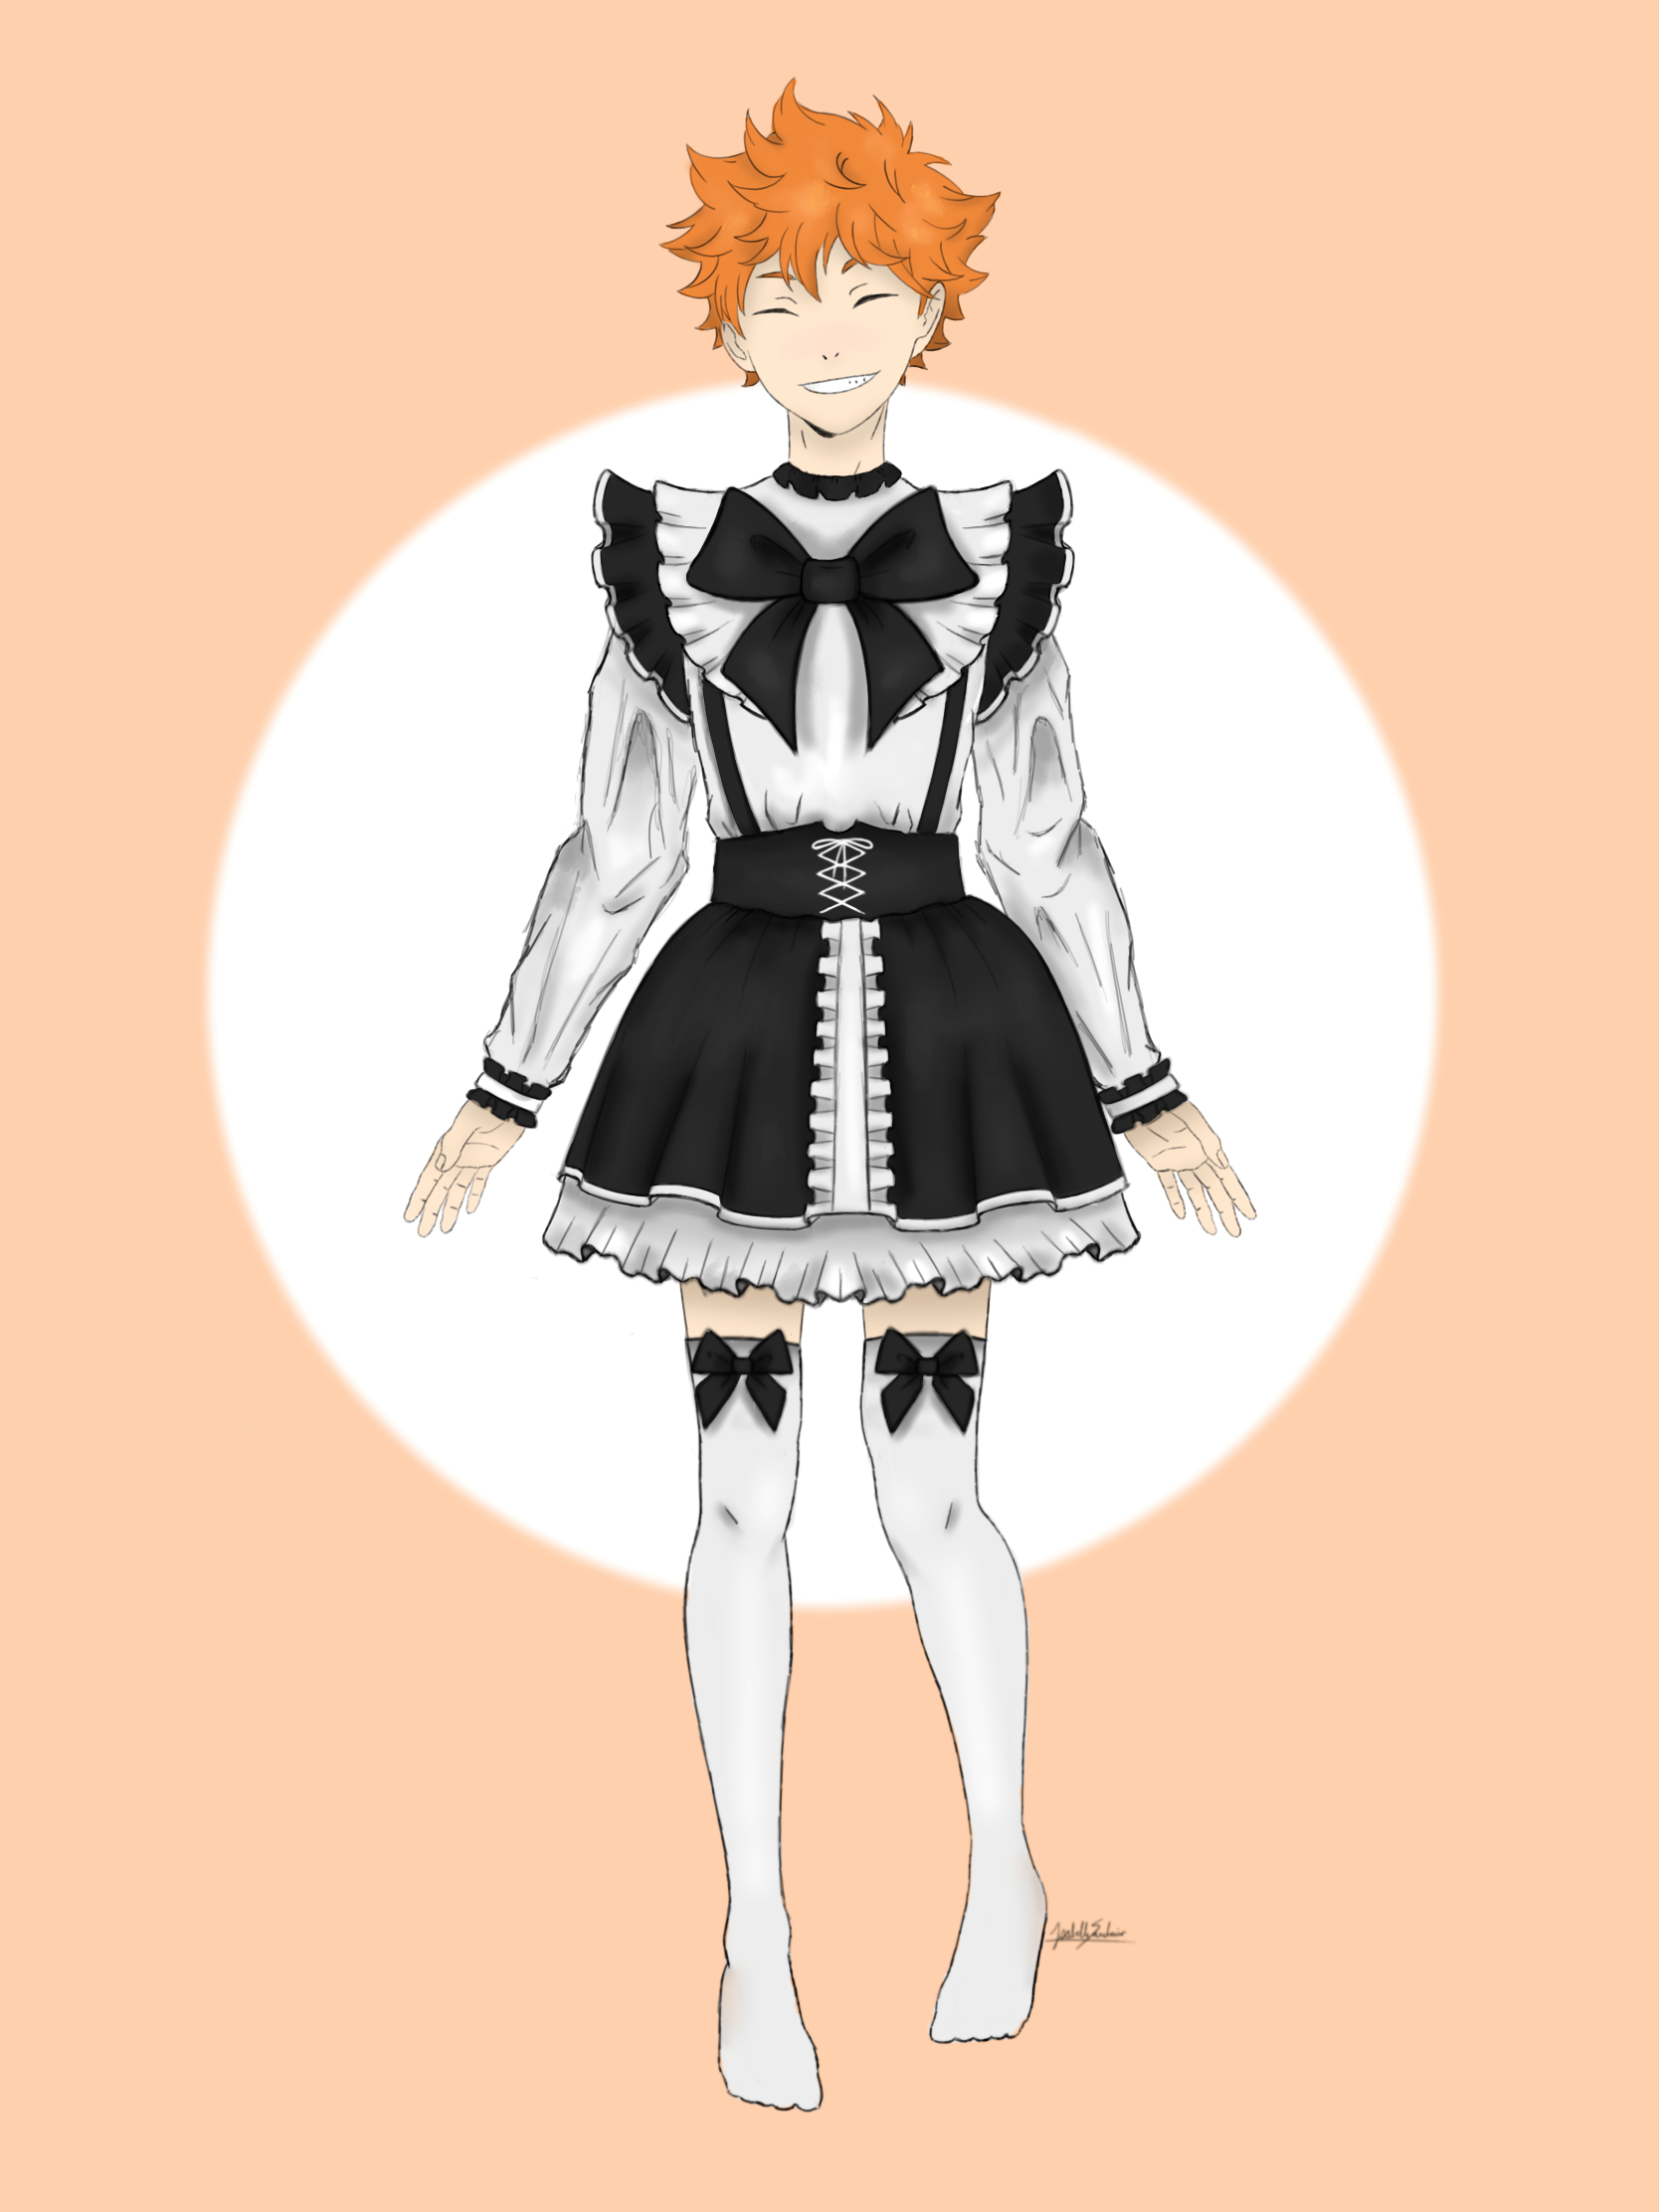 Hinata in maid outfit by strawberrysimp on DeviantArt